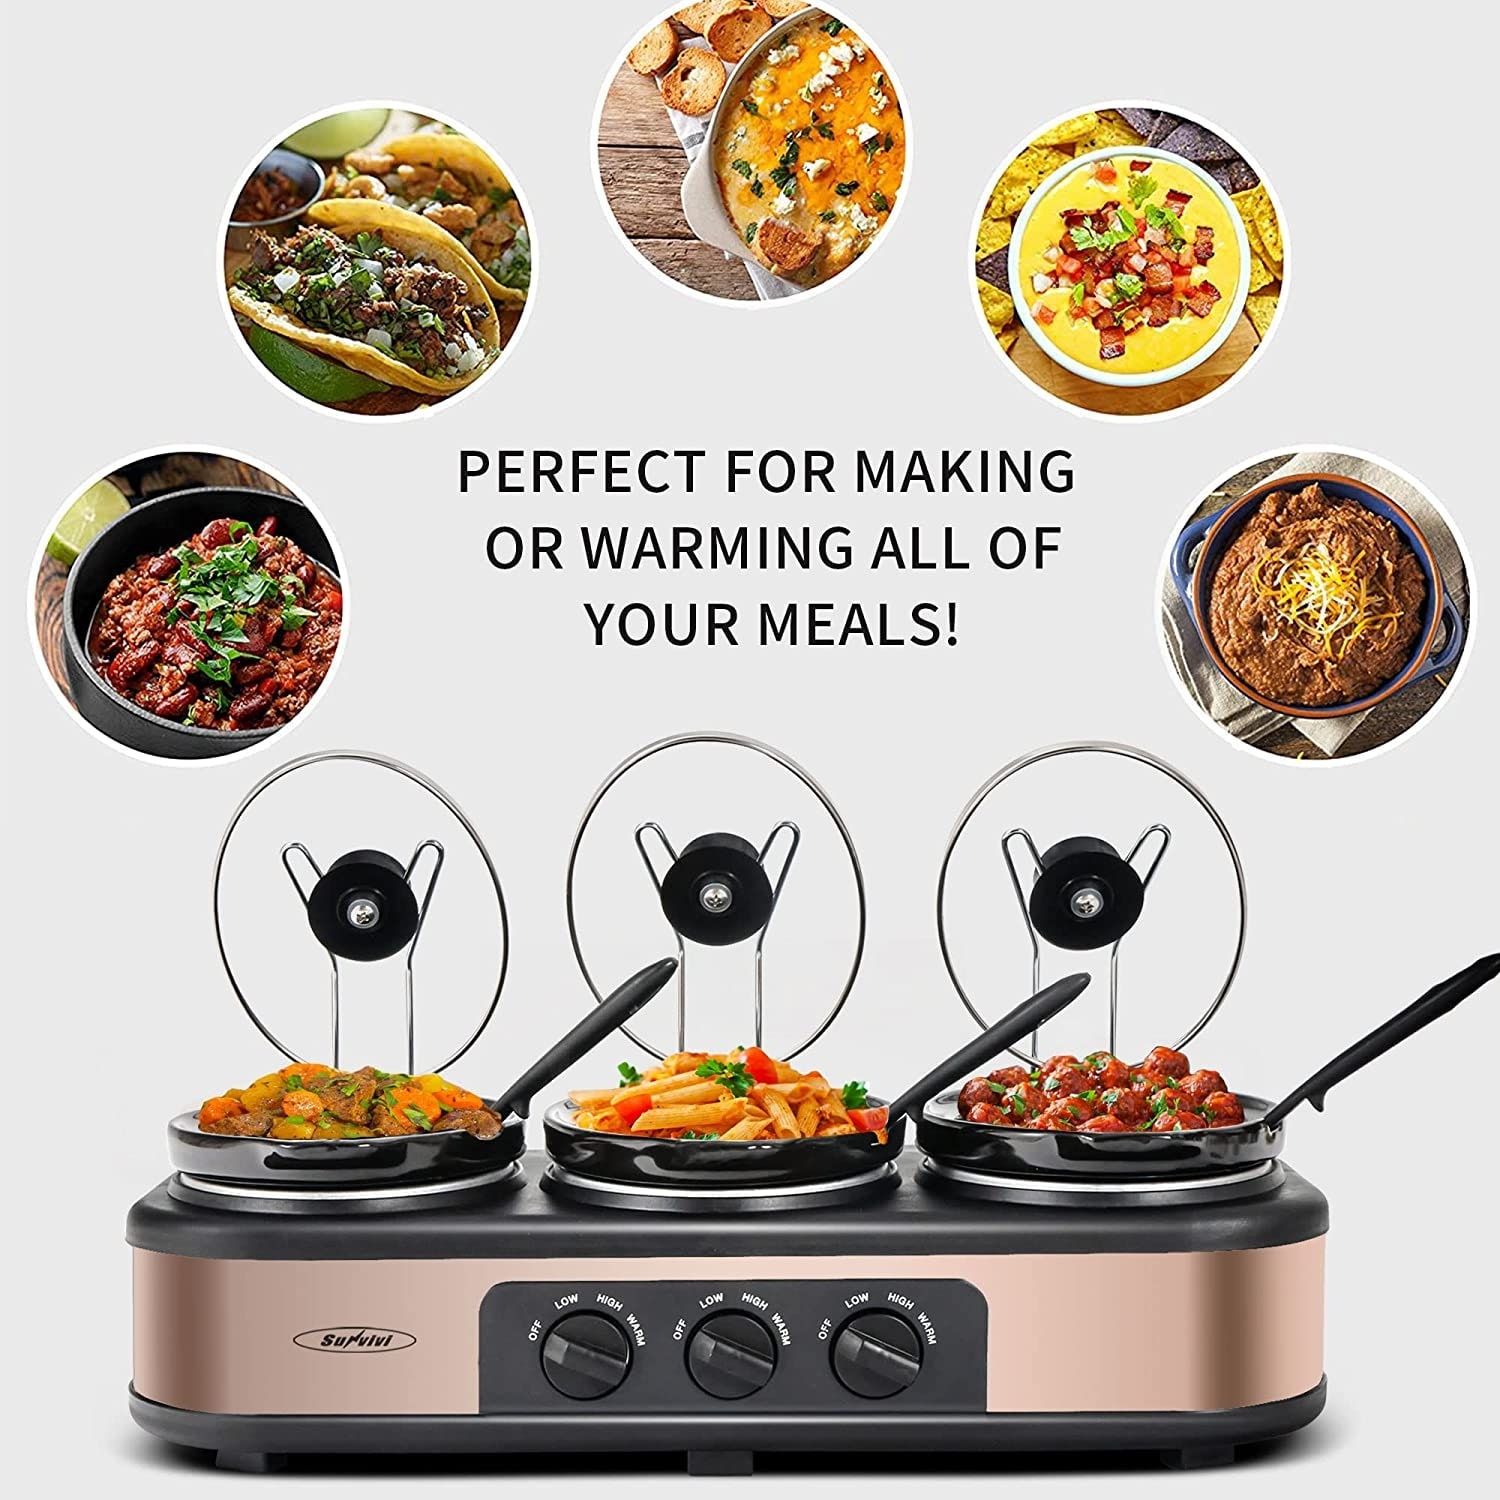 https://ak1.ostkcdn.com/images/products/is/images/direct/c82973d20908fd4b5eec24e683e746e16d5e9852/Slow-Cooker%2C-Triple-Slow-Cooker-Buffet-Server-3-Pot-Food-Warmer%2C-3-Section-1.5-Quart-Oval-Slow-Cooker-Buffet-Food-Warmer.jpg